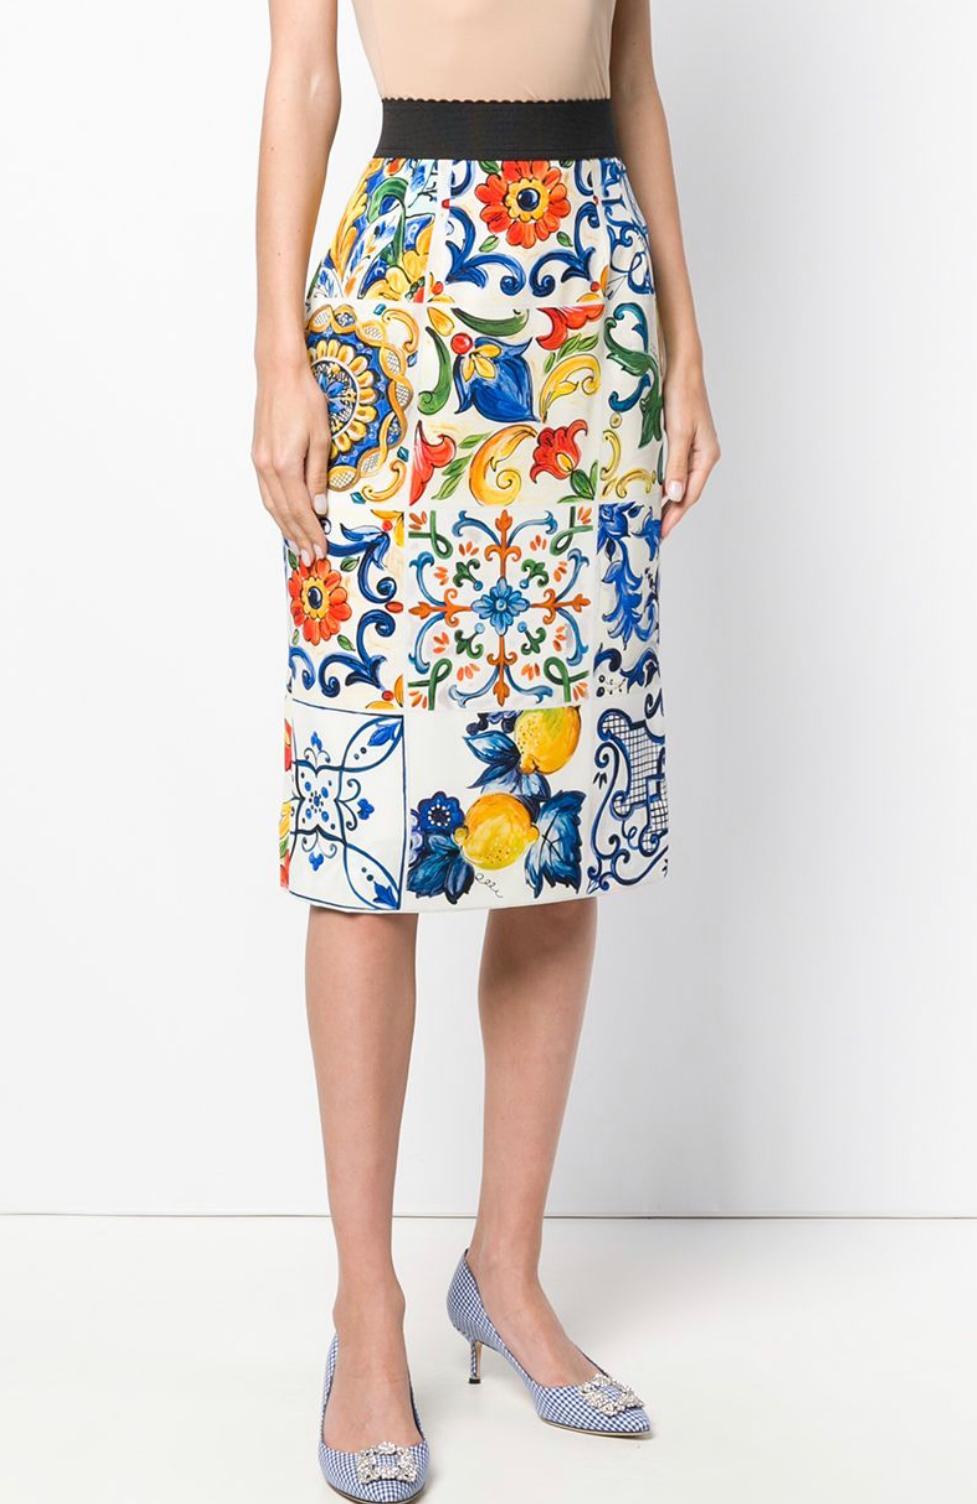 Dolce & Gabbana Sicily Maiolica printed silk midi skirt 
Elasticated stretch waist, rear zip 
Size 46IT -UK14- XL. 
Brand new with tags! 
Please check my other DG clothing, beachwear, shoes & accessories!  